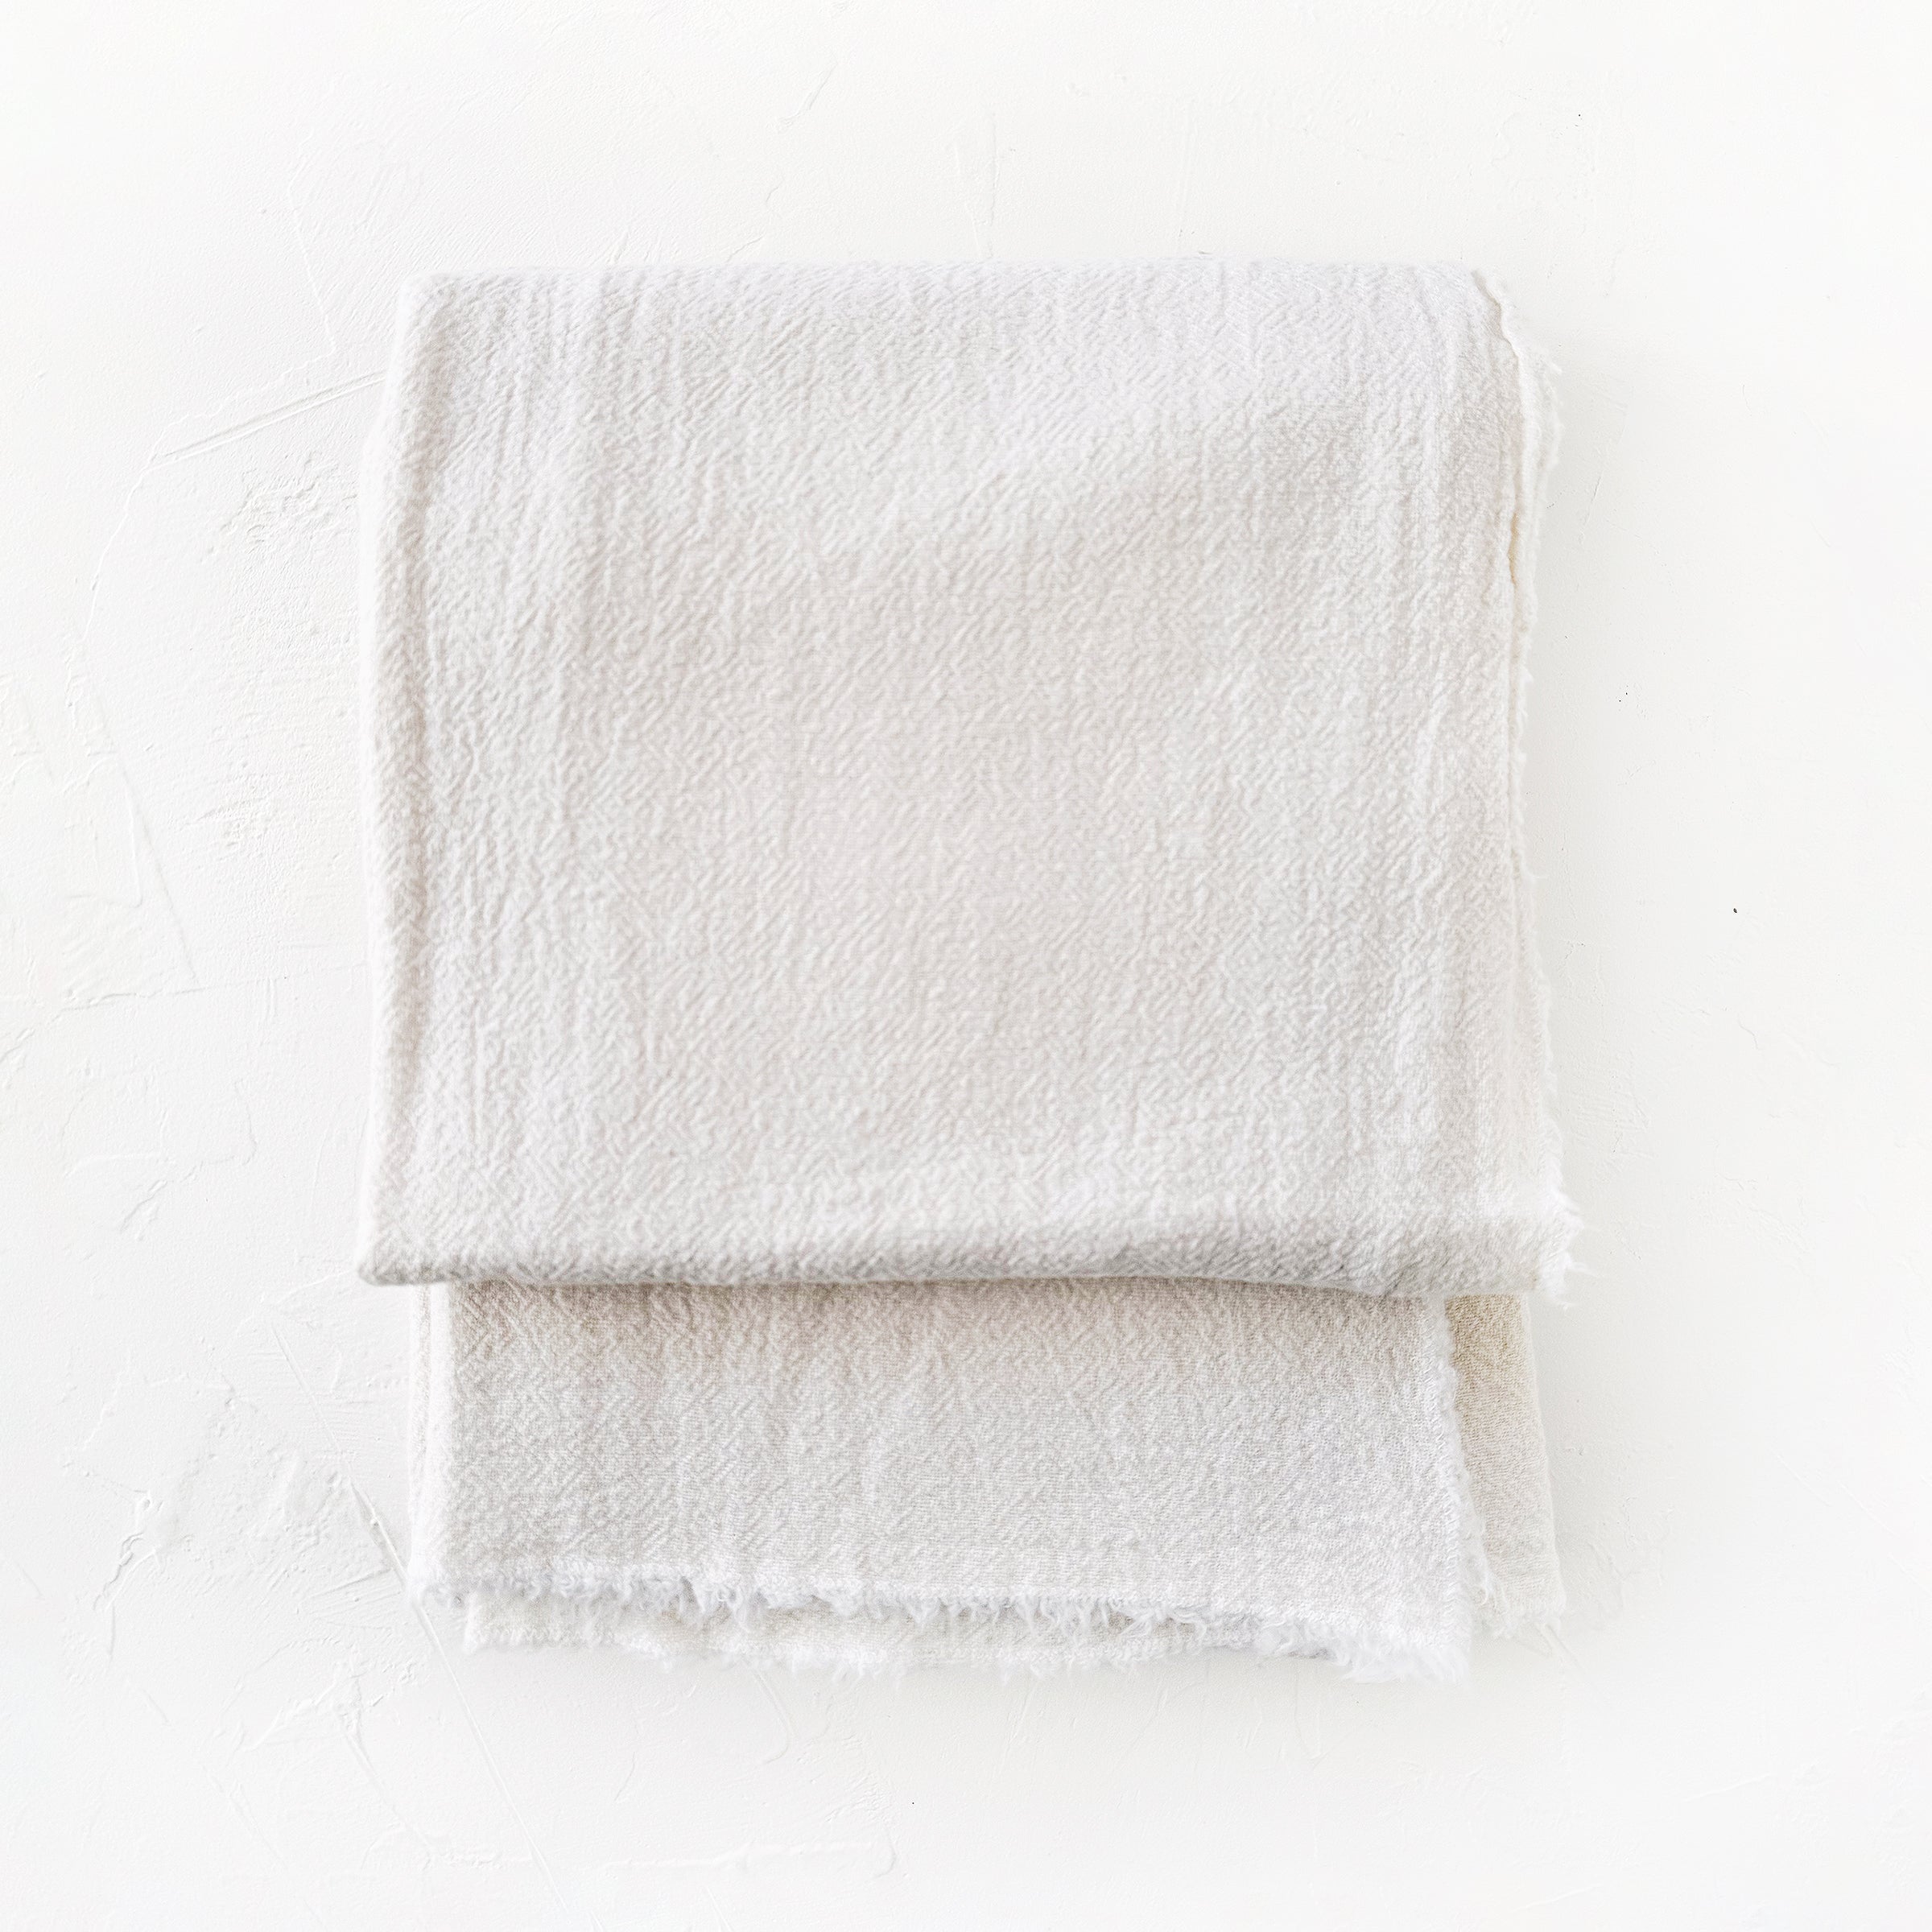 Raw Linen Tablecloth in Chalk